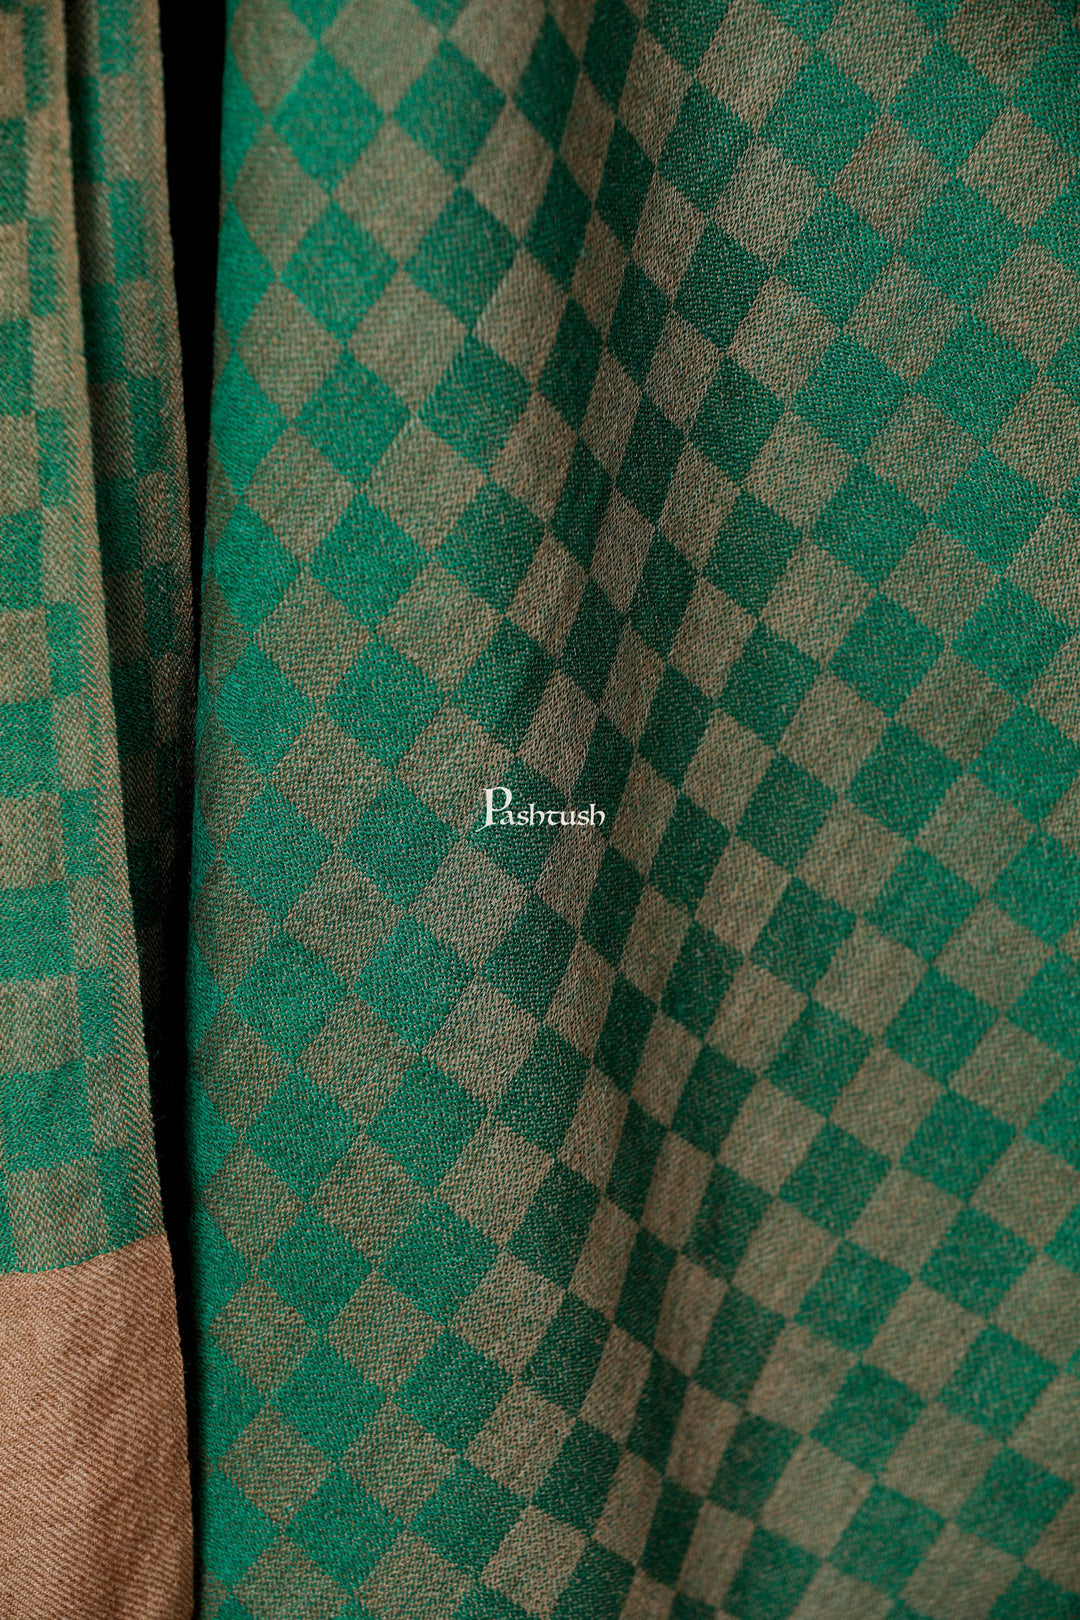 Pashtush India Gift Pack Pashtush His And Her Set Of Checkered Stoles With Premium Gift Box Packaging, Beige and Green